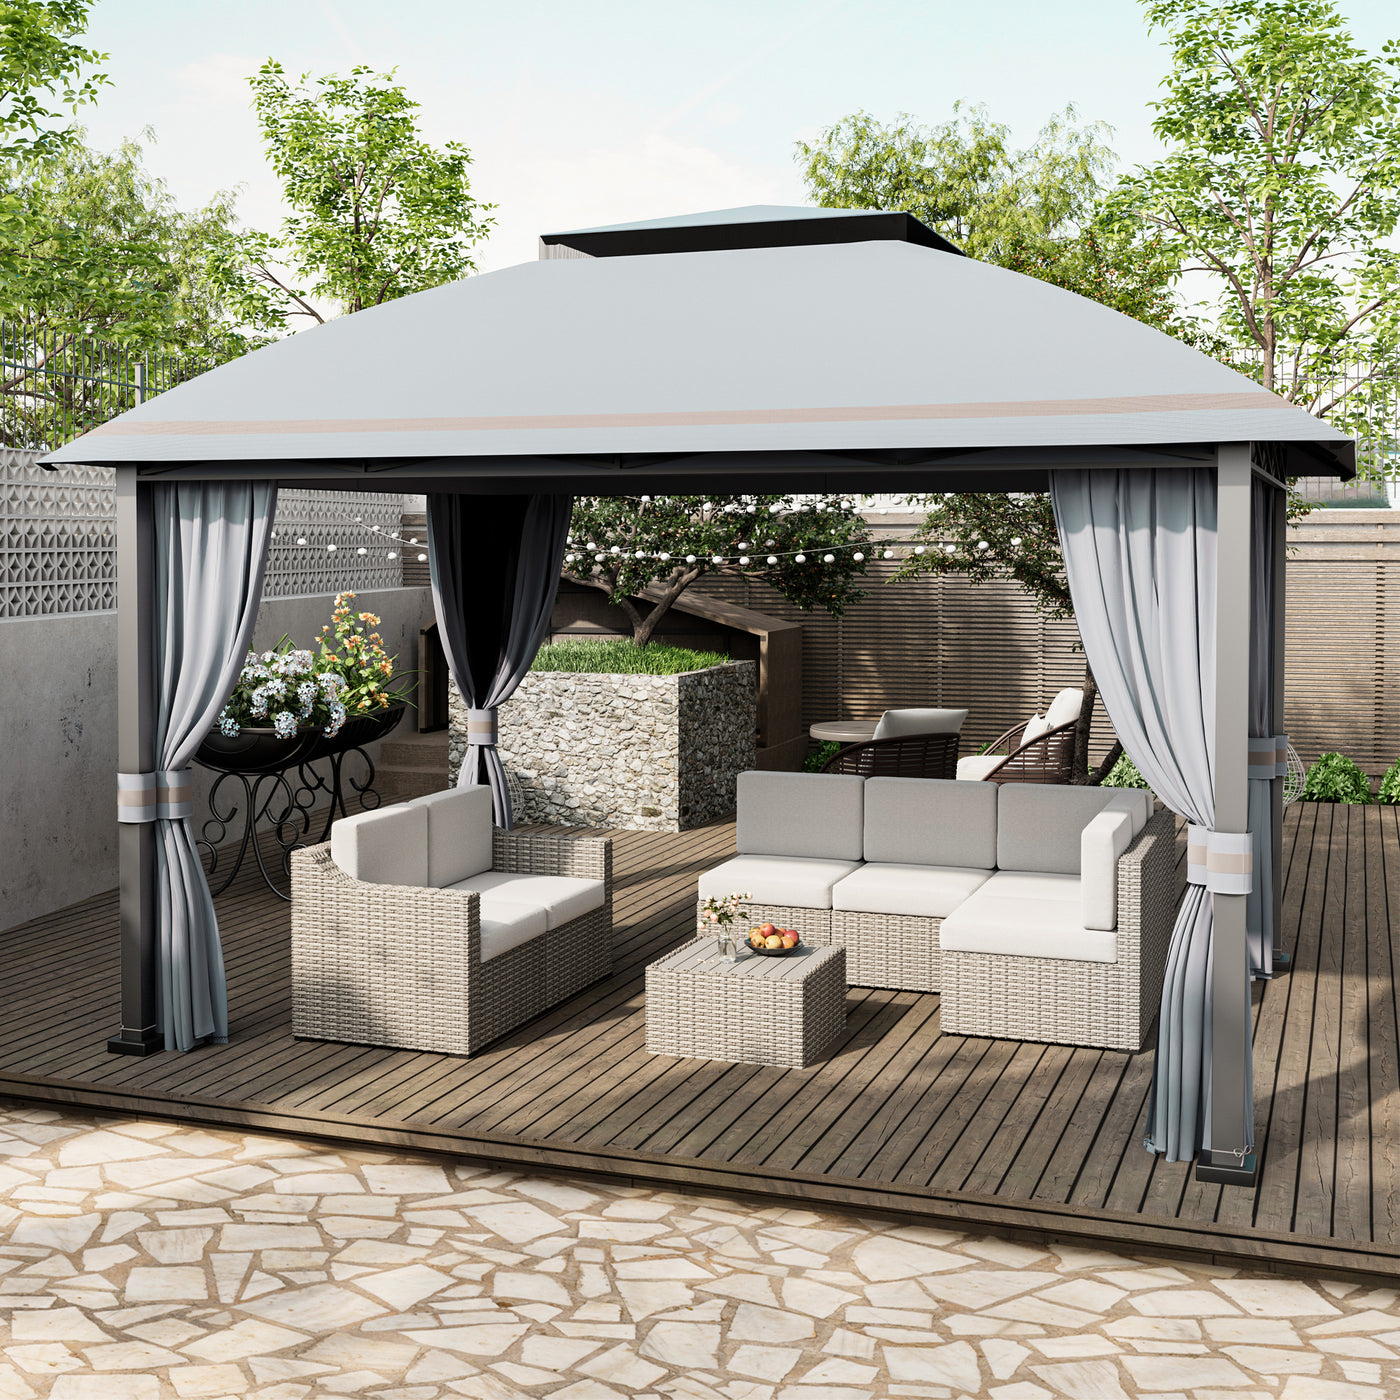 HAPPATIO 10x13 Gazebo, Patio Gazebo with Mosquito Netting and Curtain, Outdoor Gazebo Canopy with Steel Canopy Support and Gray Woodgrain Finish Aluminum Frame for Deck, Garden, Yard